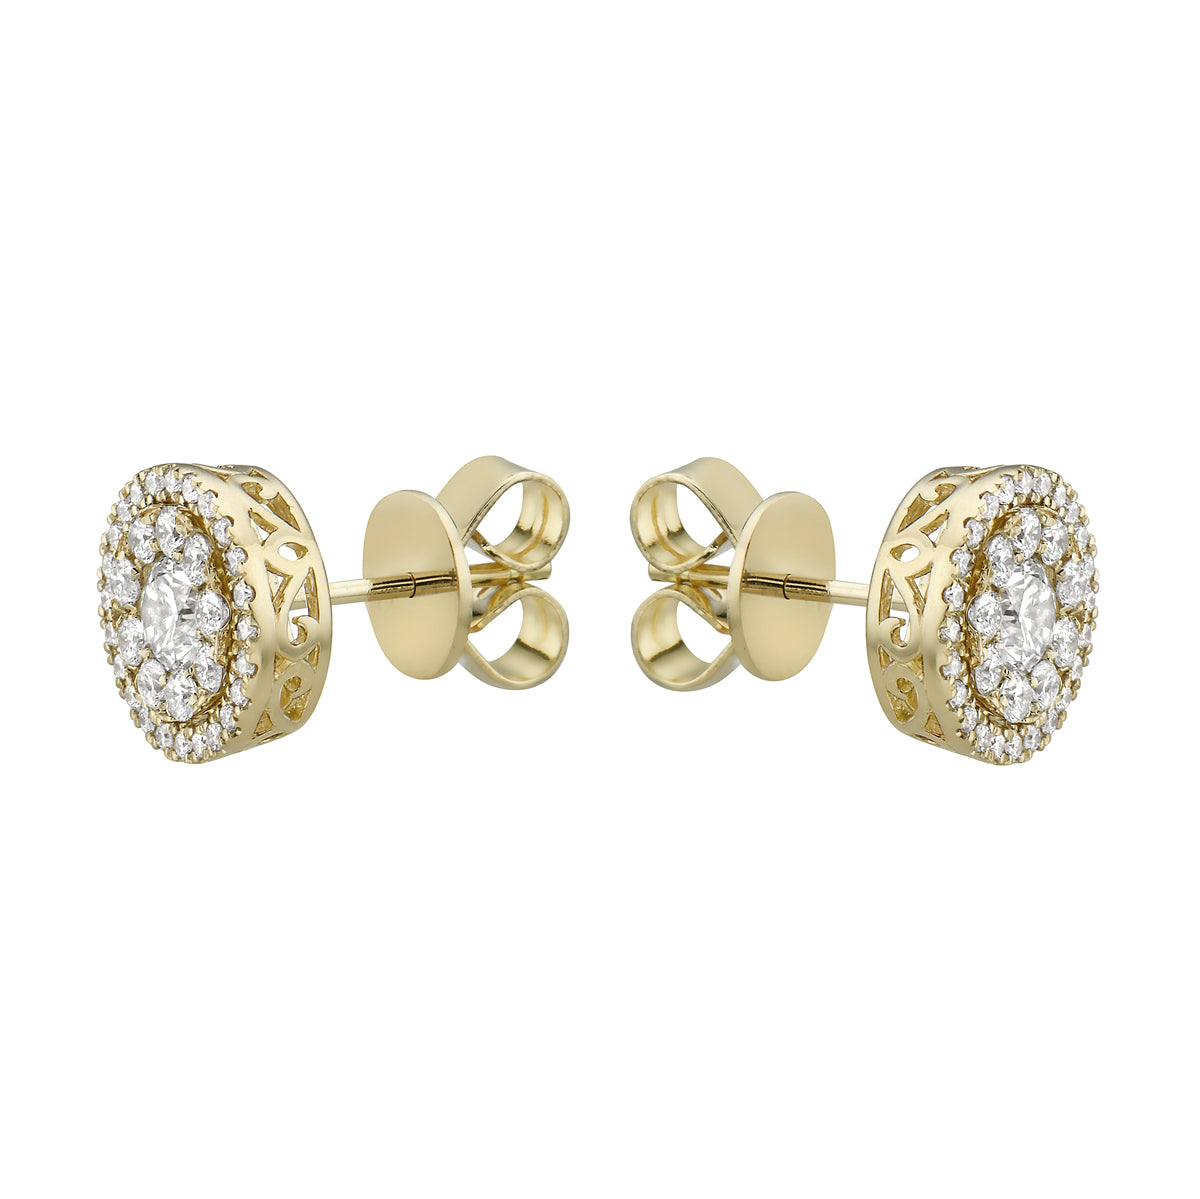 Earring 18KY/3.3G 66RD-0.45CT 2RD-0.40CT